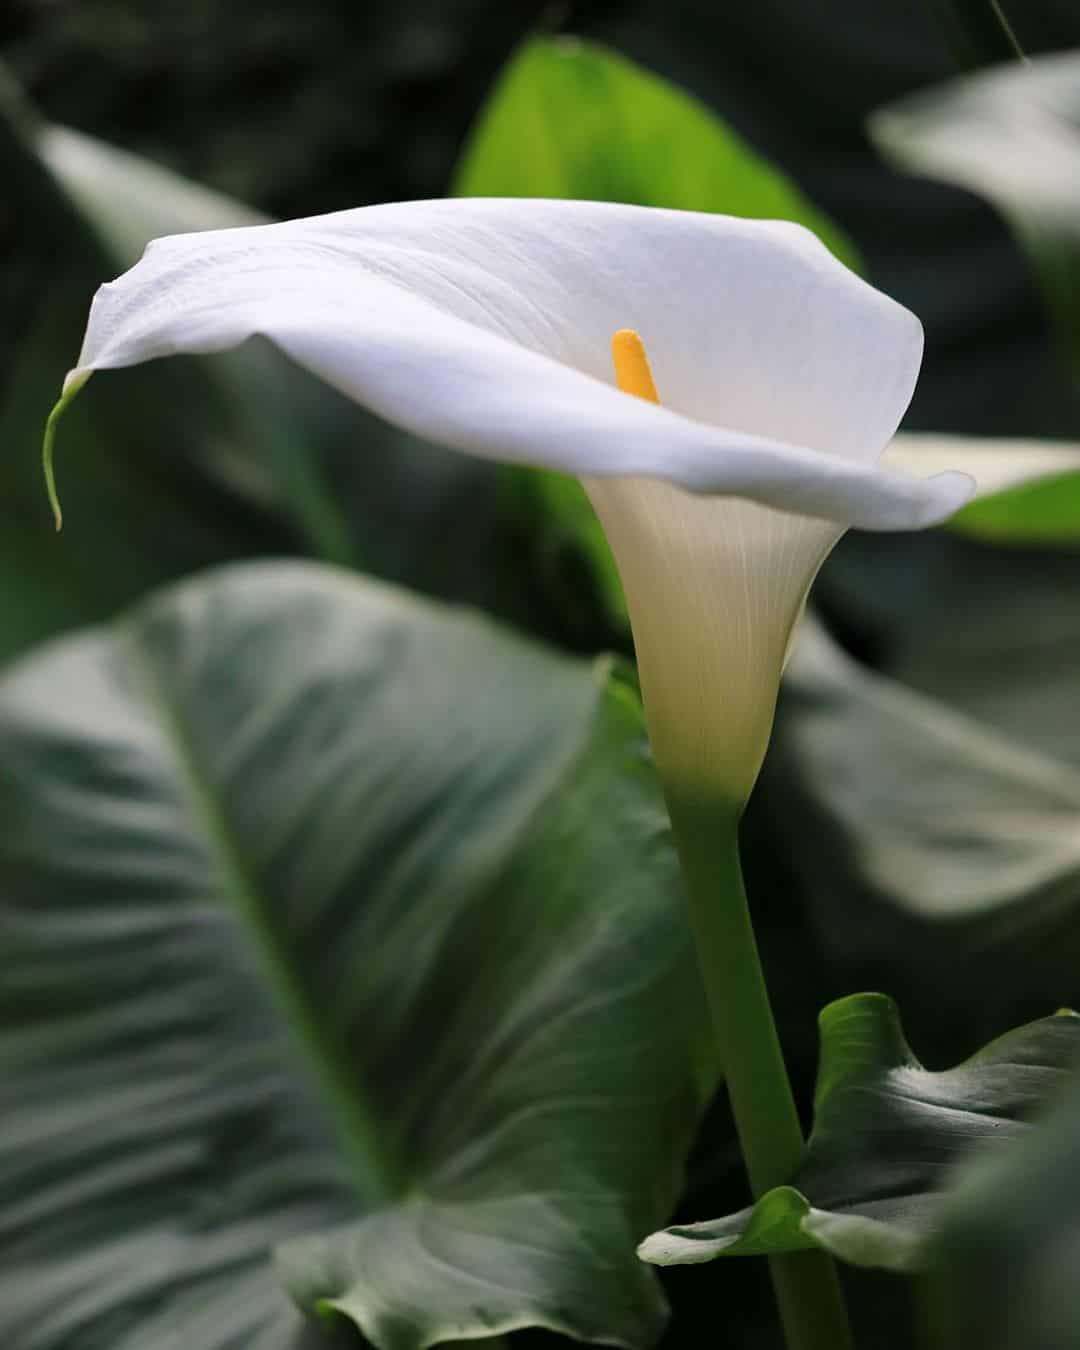 The Calla Lily Flowers